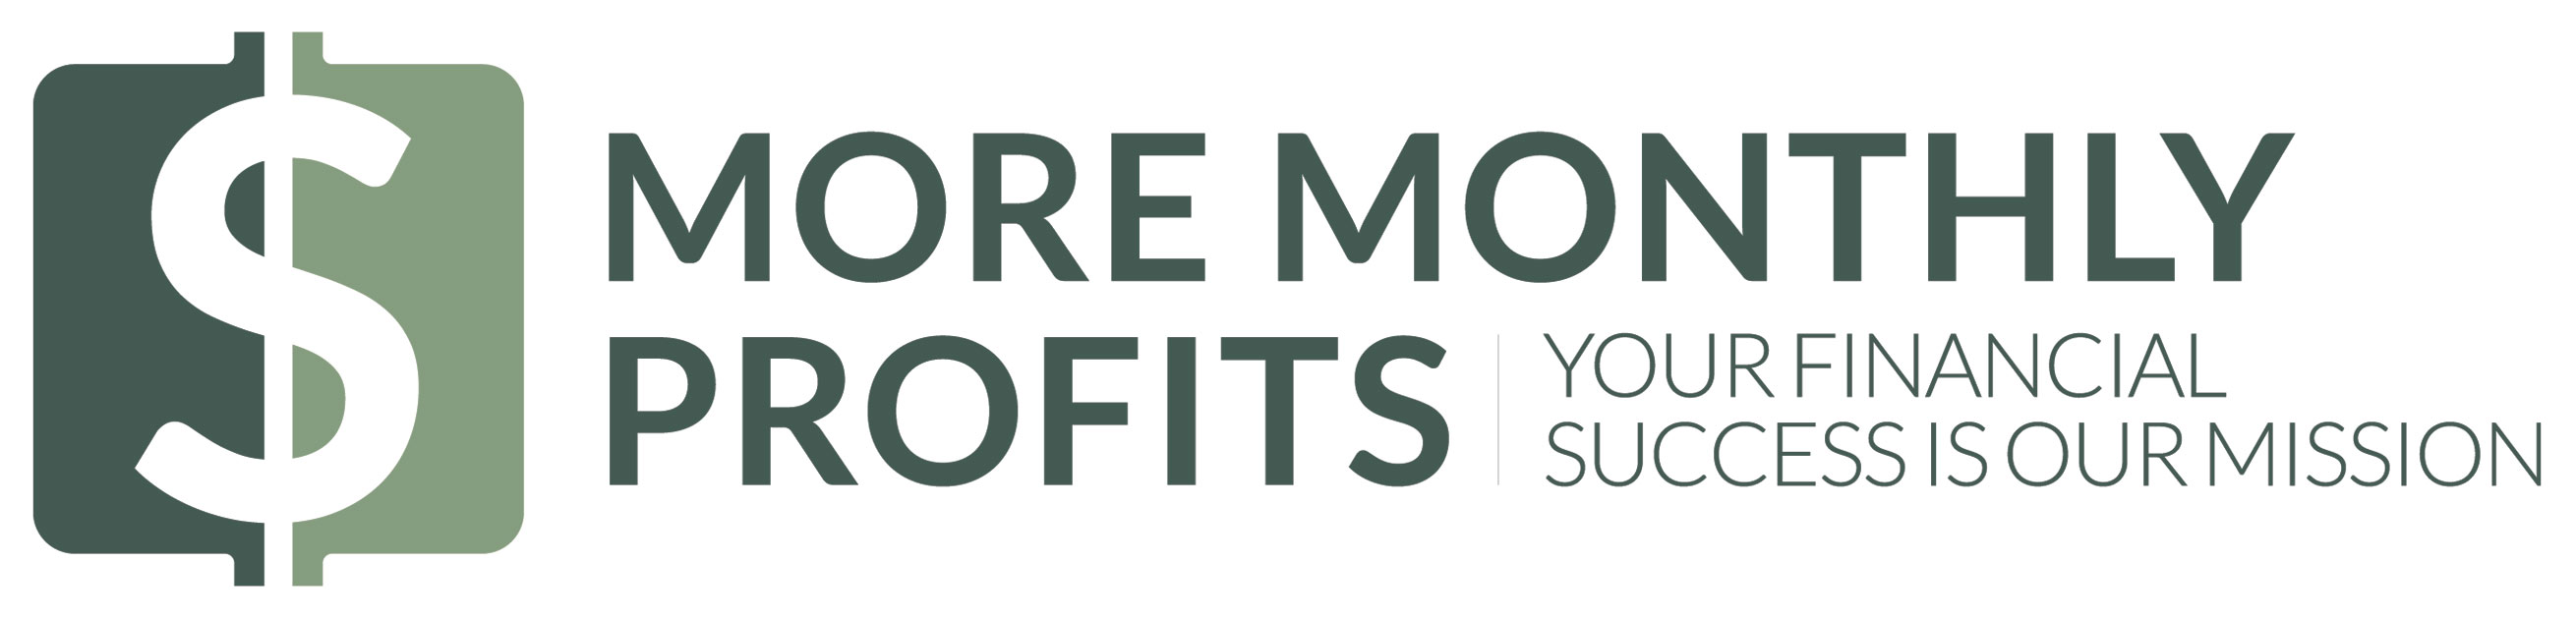 More Monthly Profits - Your Financial Success Is Our Mission